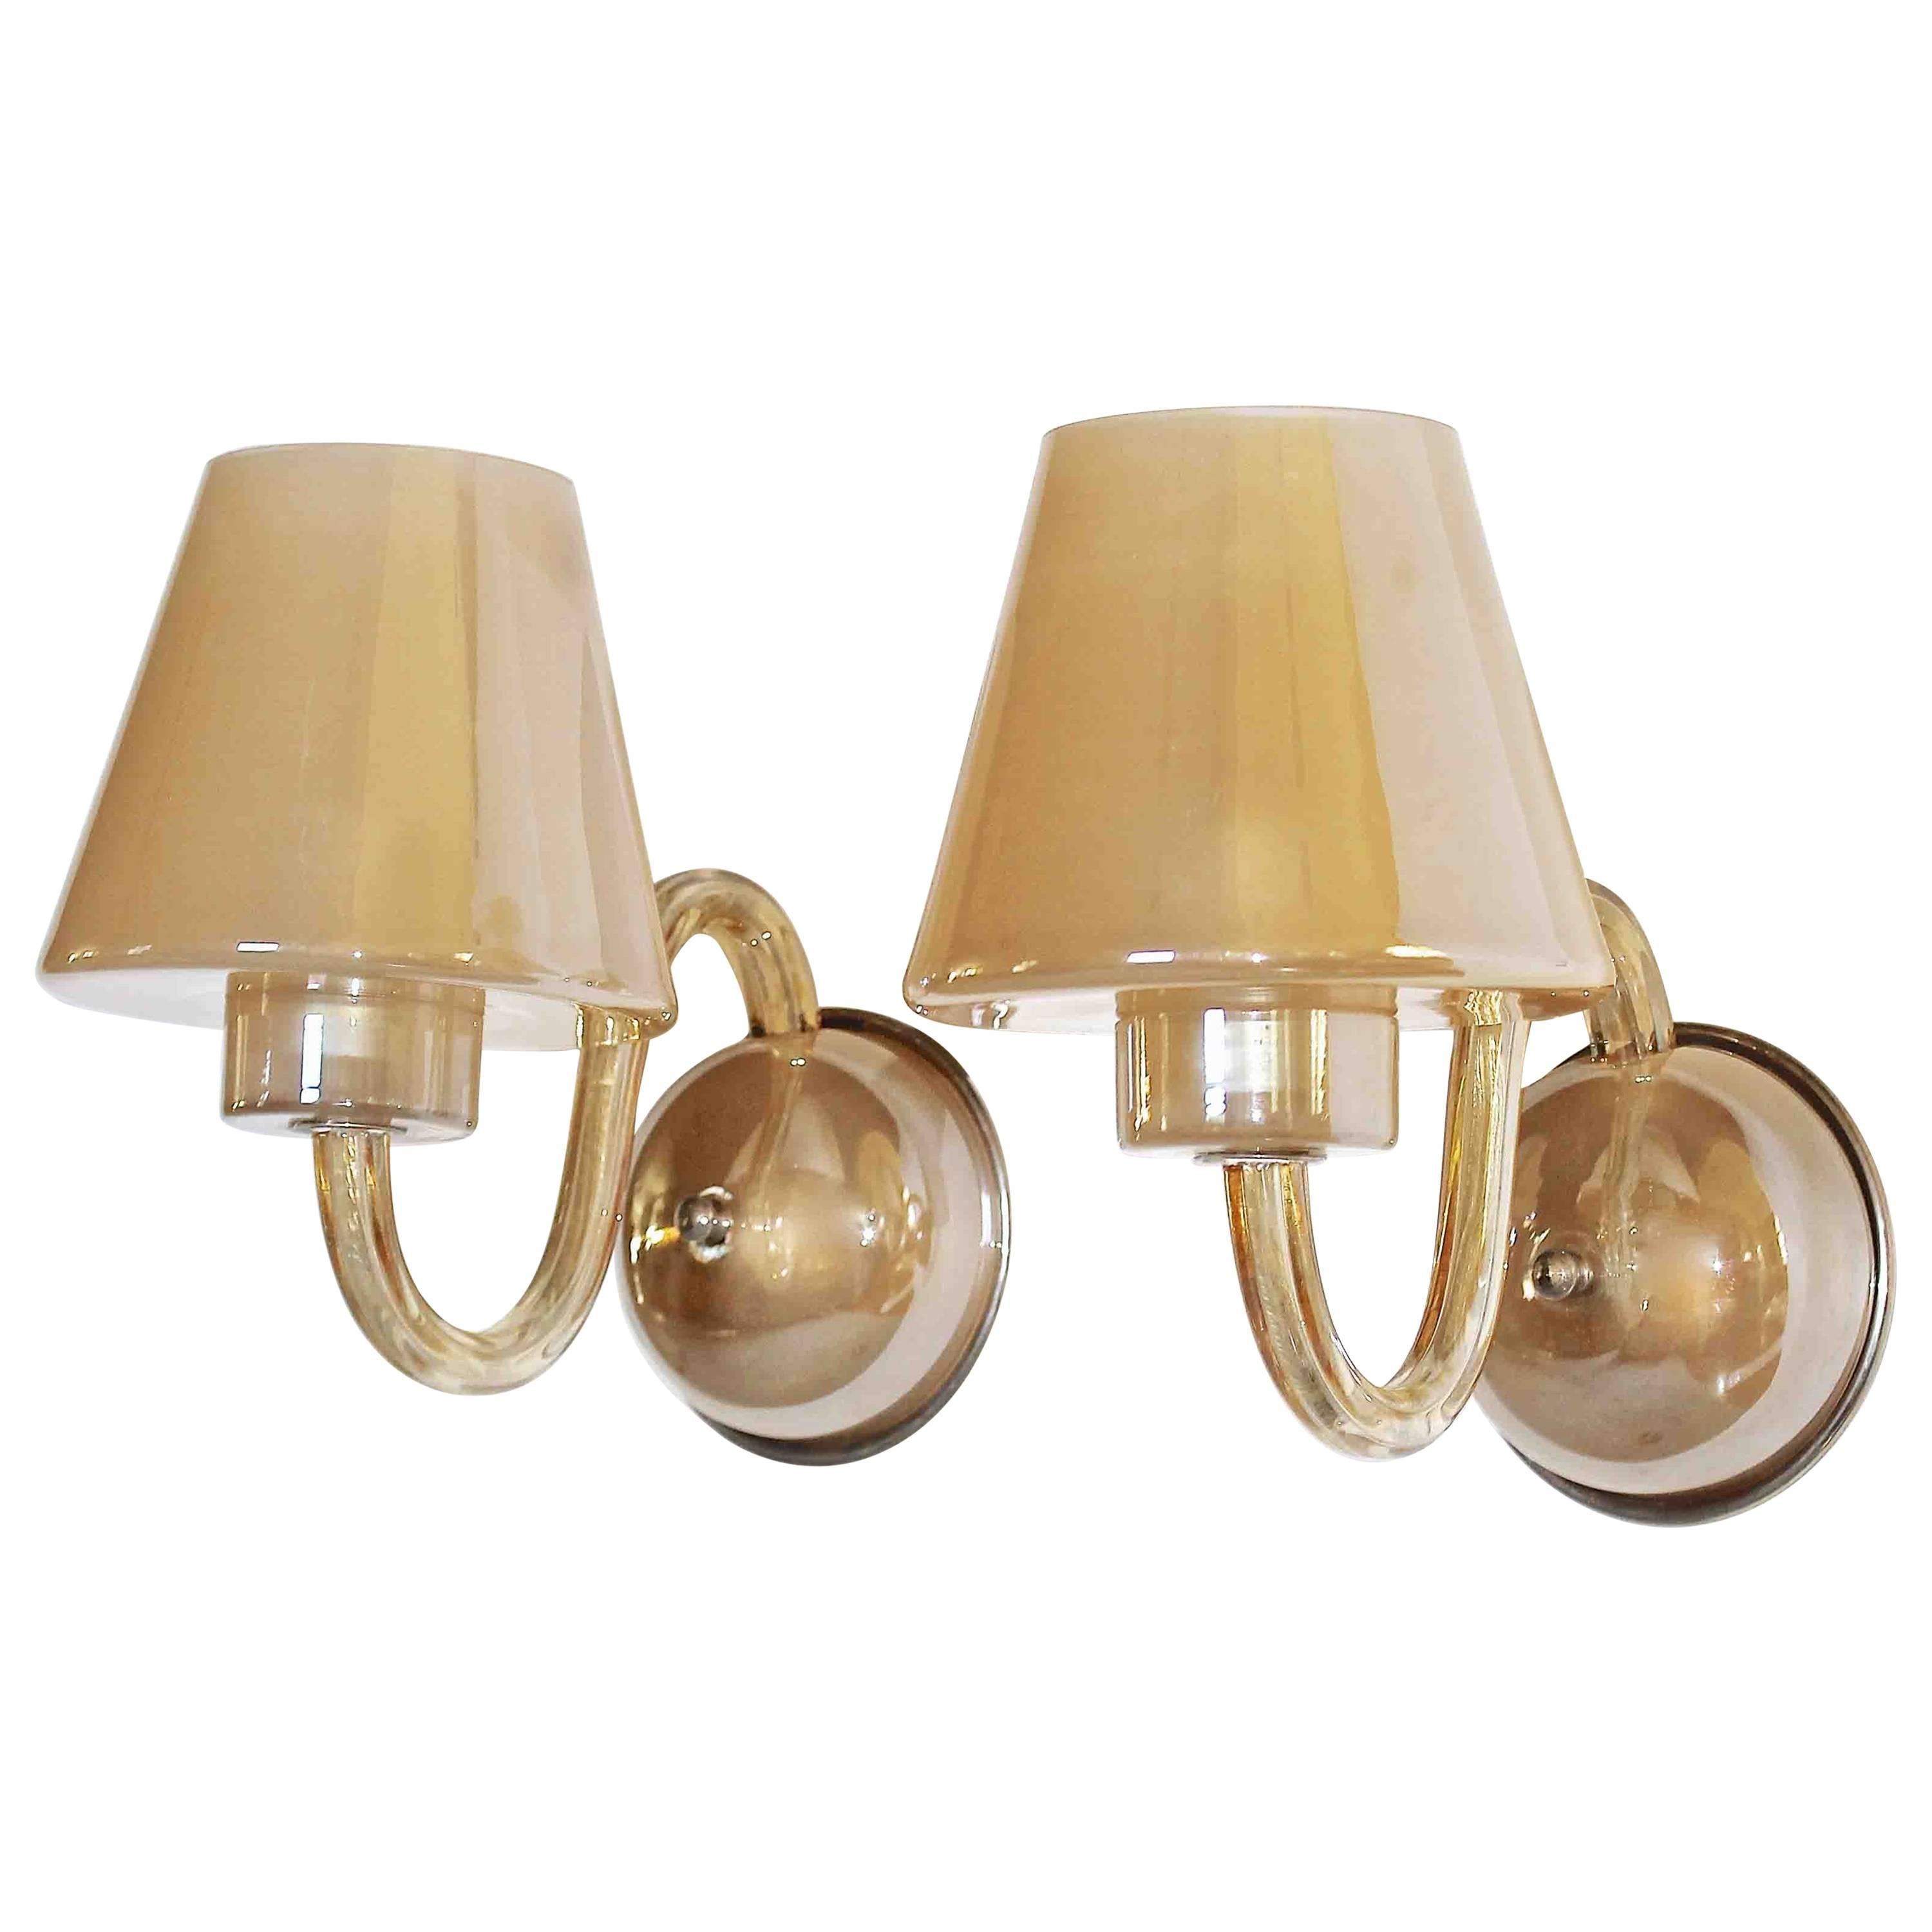 Pair of Murano Italian Gold Champagne Glass Wall Sconces